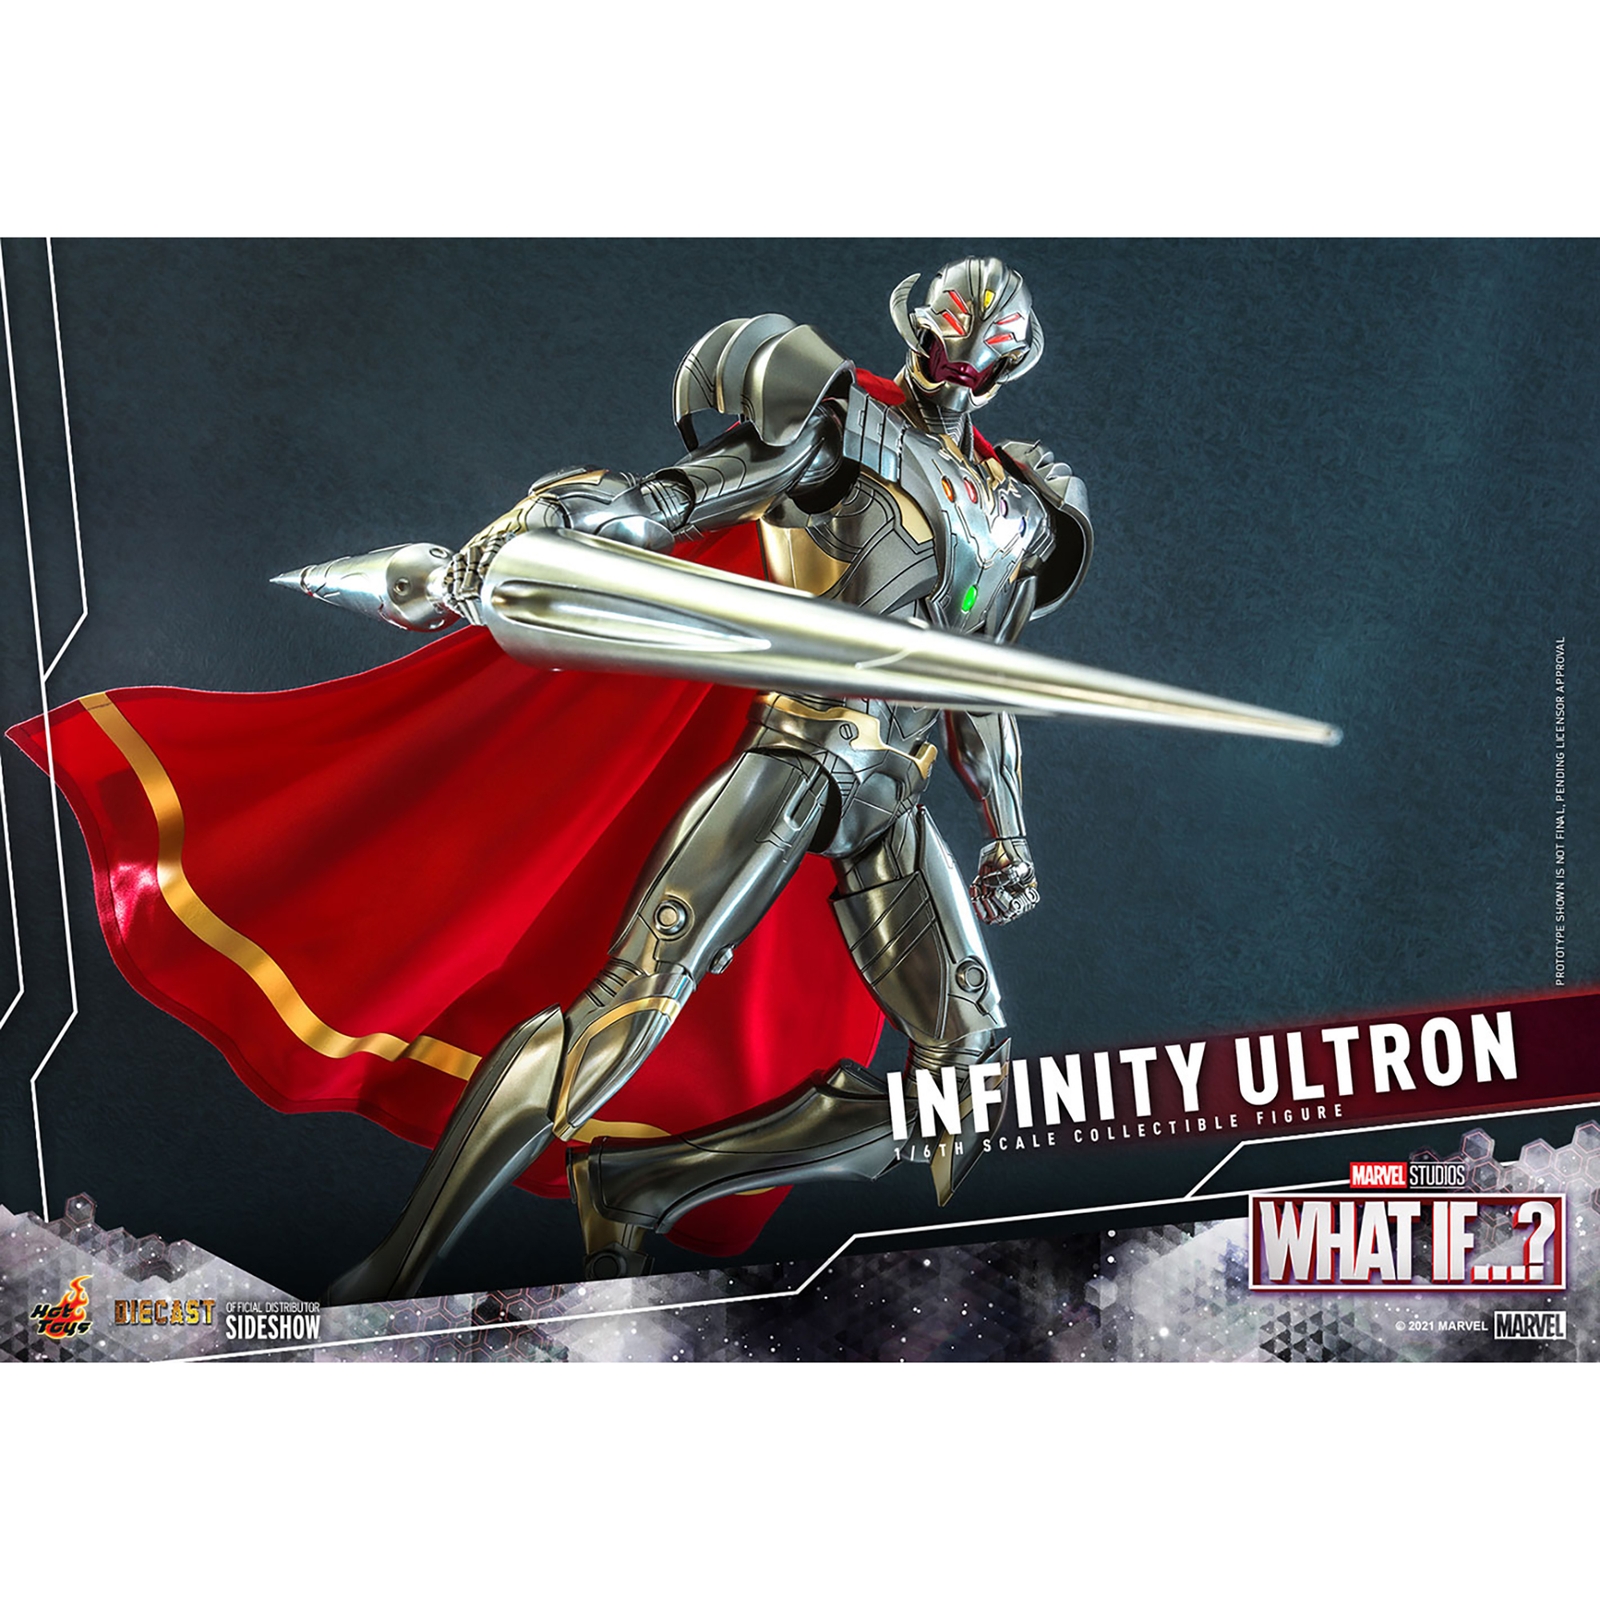 Hot Toys 1:6 Scale Marvel Infinity Ultron - What If...? Collectible Statue (39cm)